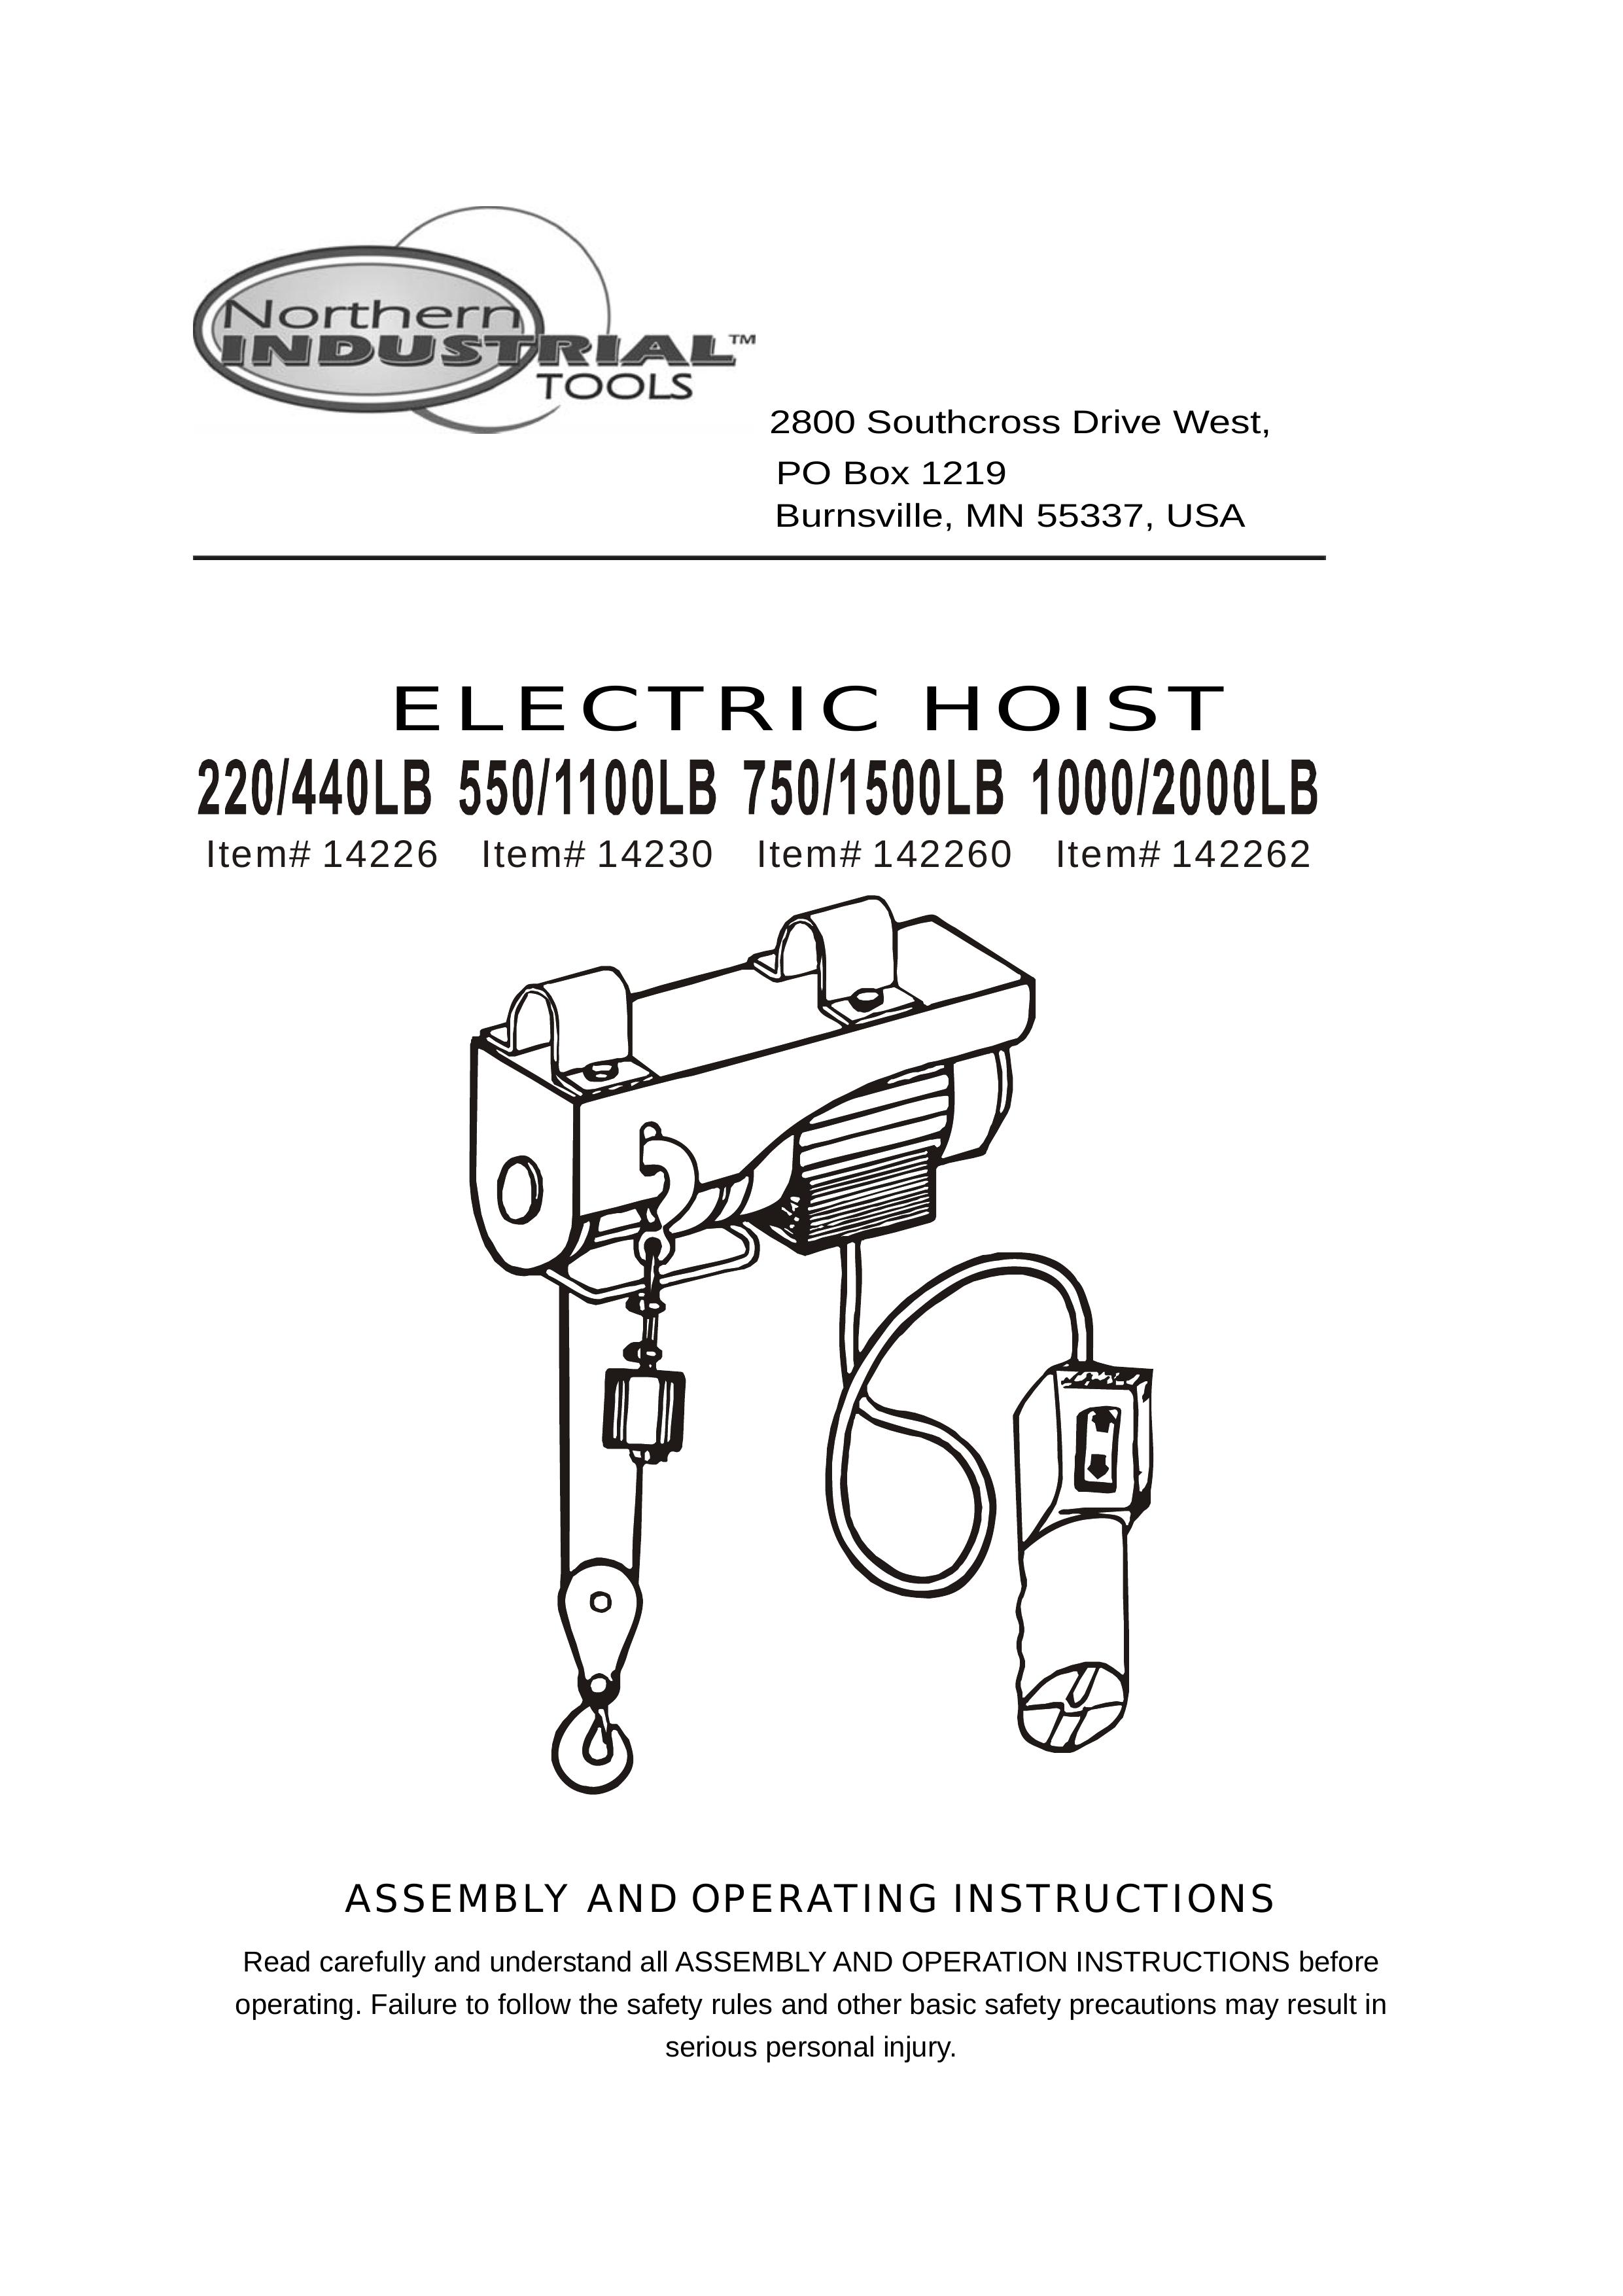 Northern Industrial Tools 14226 Personal Lift User Manual